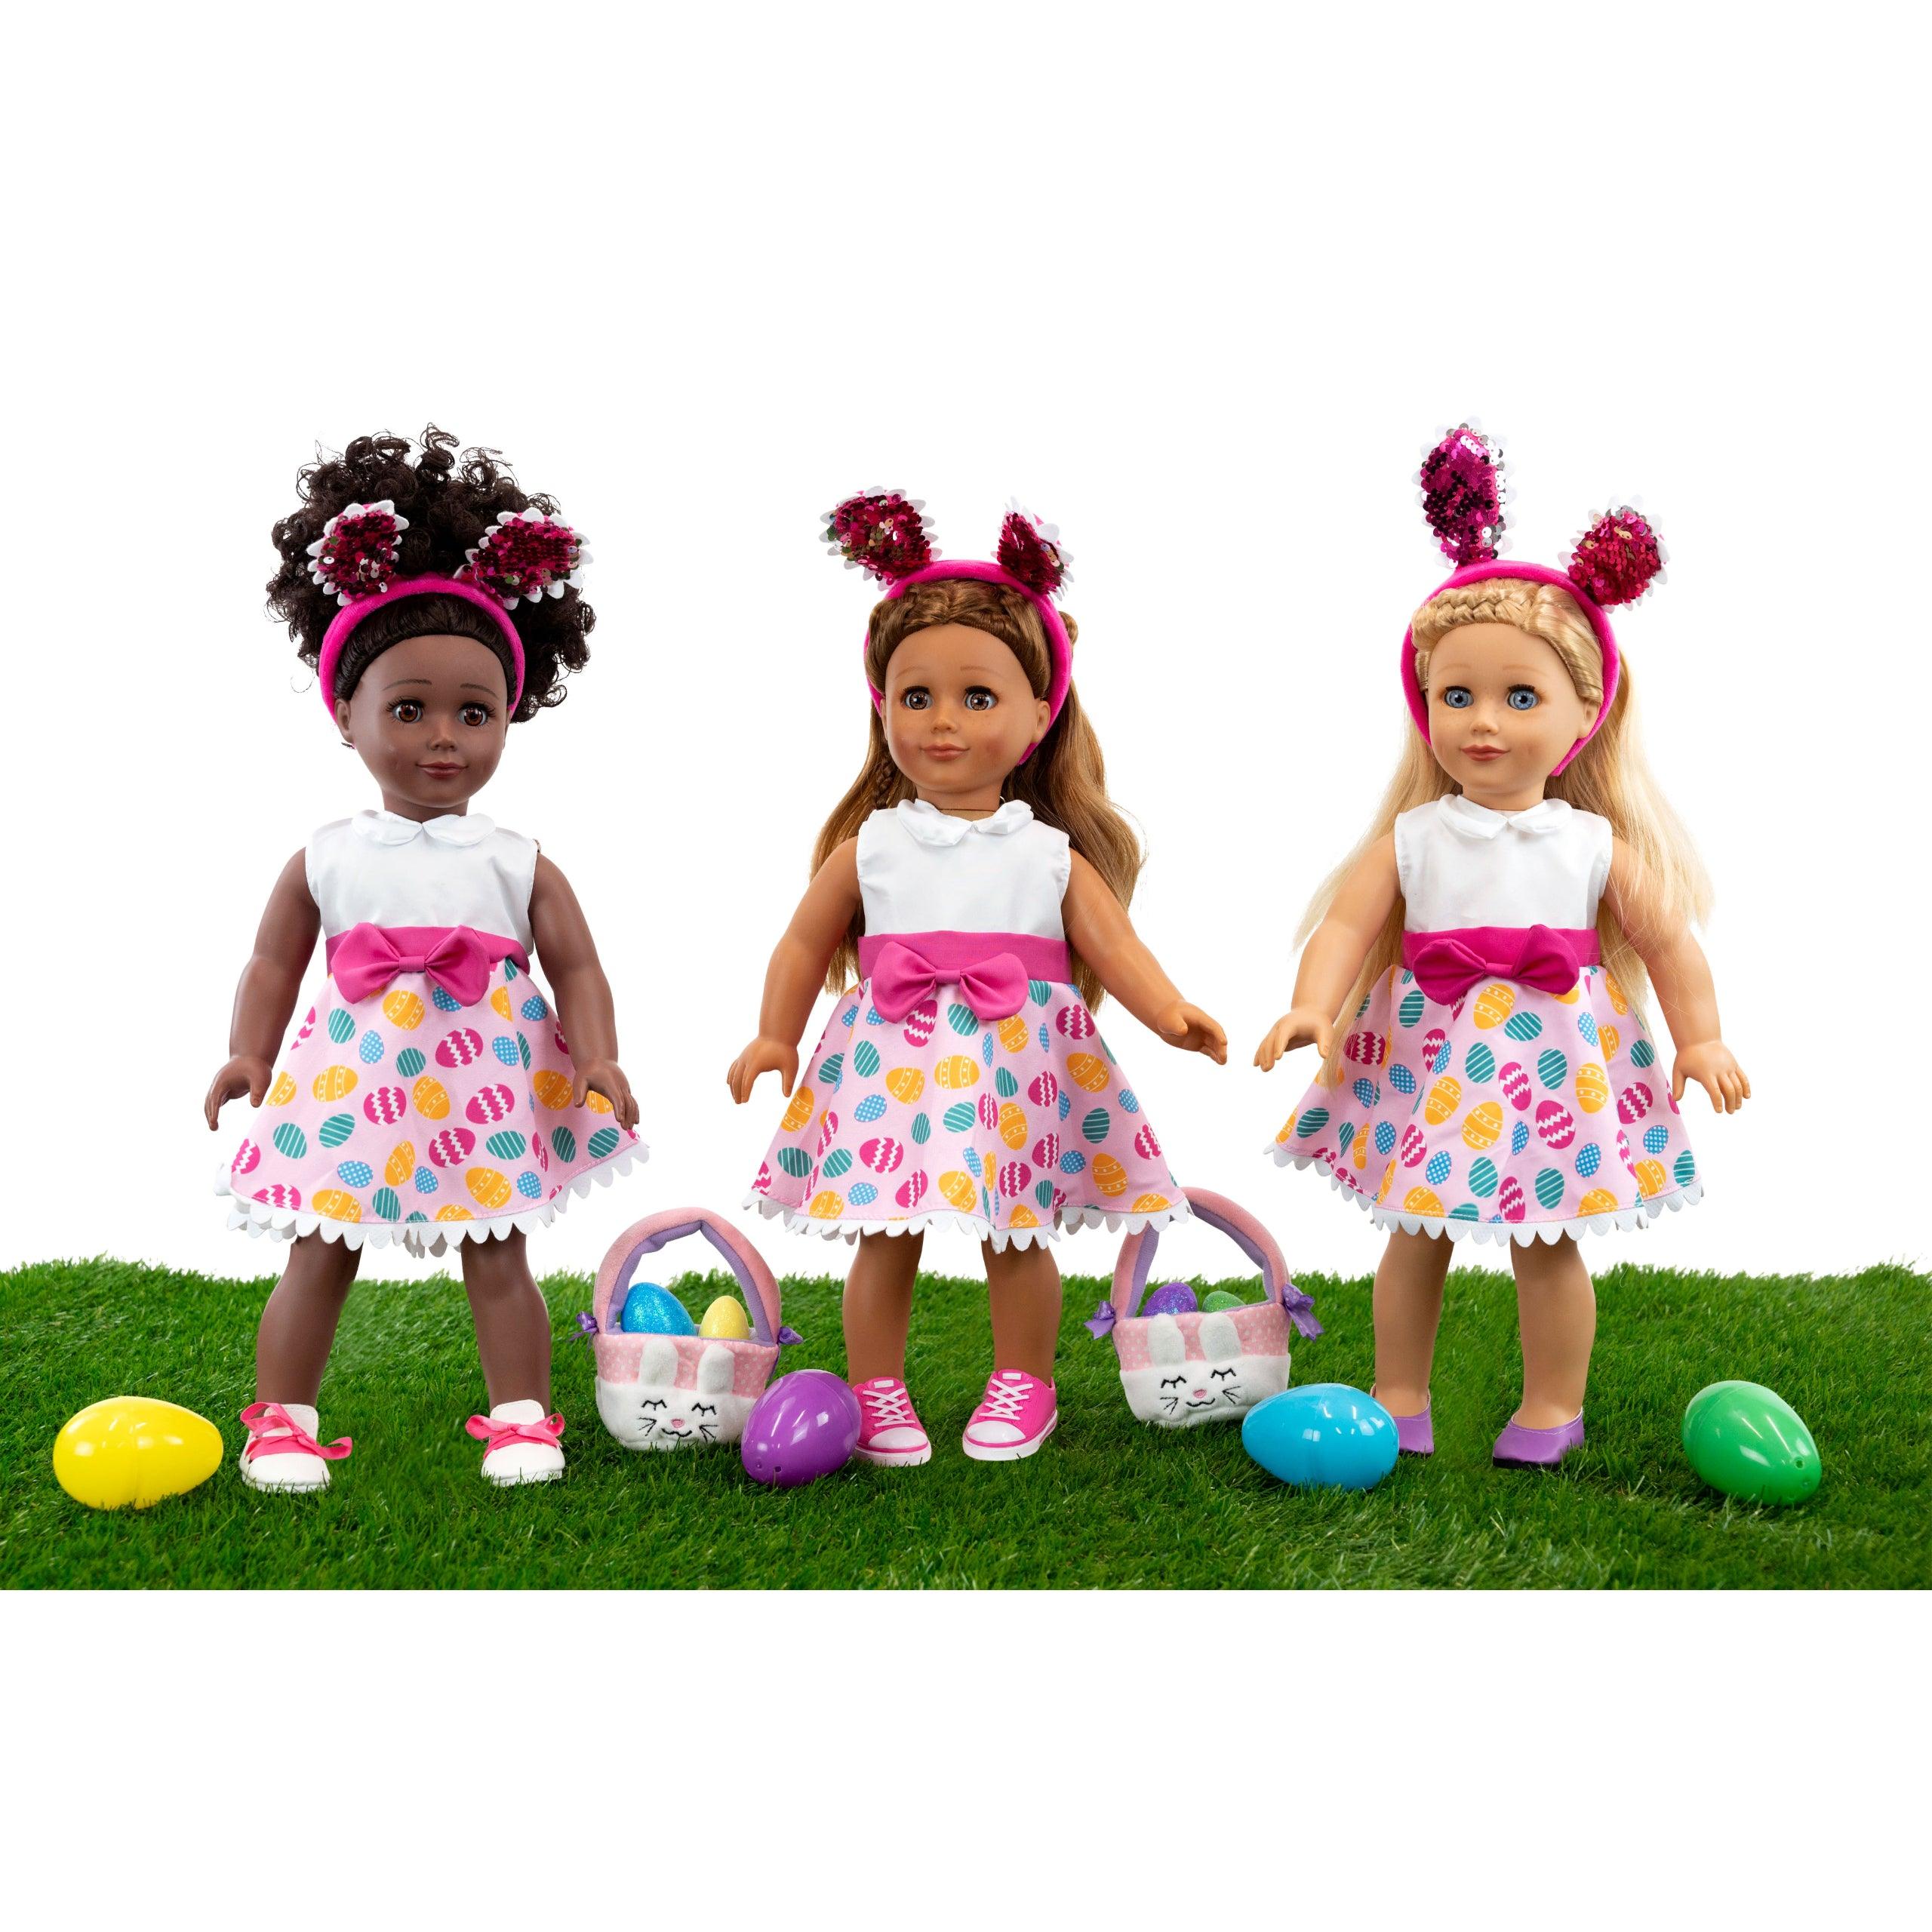 Playtime by Eimmie Playtime Pack Easter with Matching Child Accessories 18 Inch Dolls - OrangeOnions Wholesale